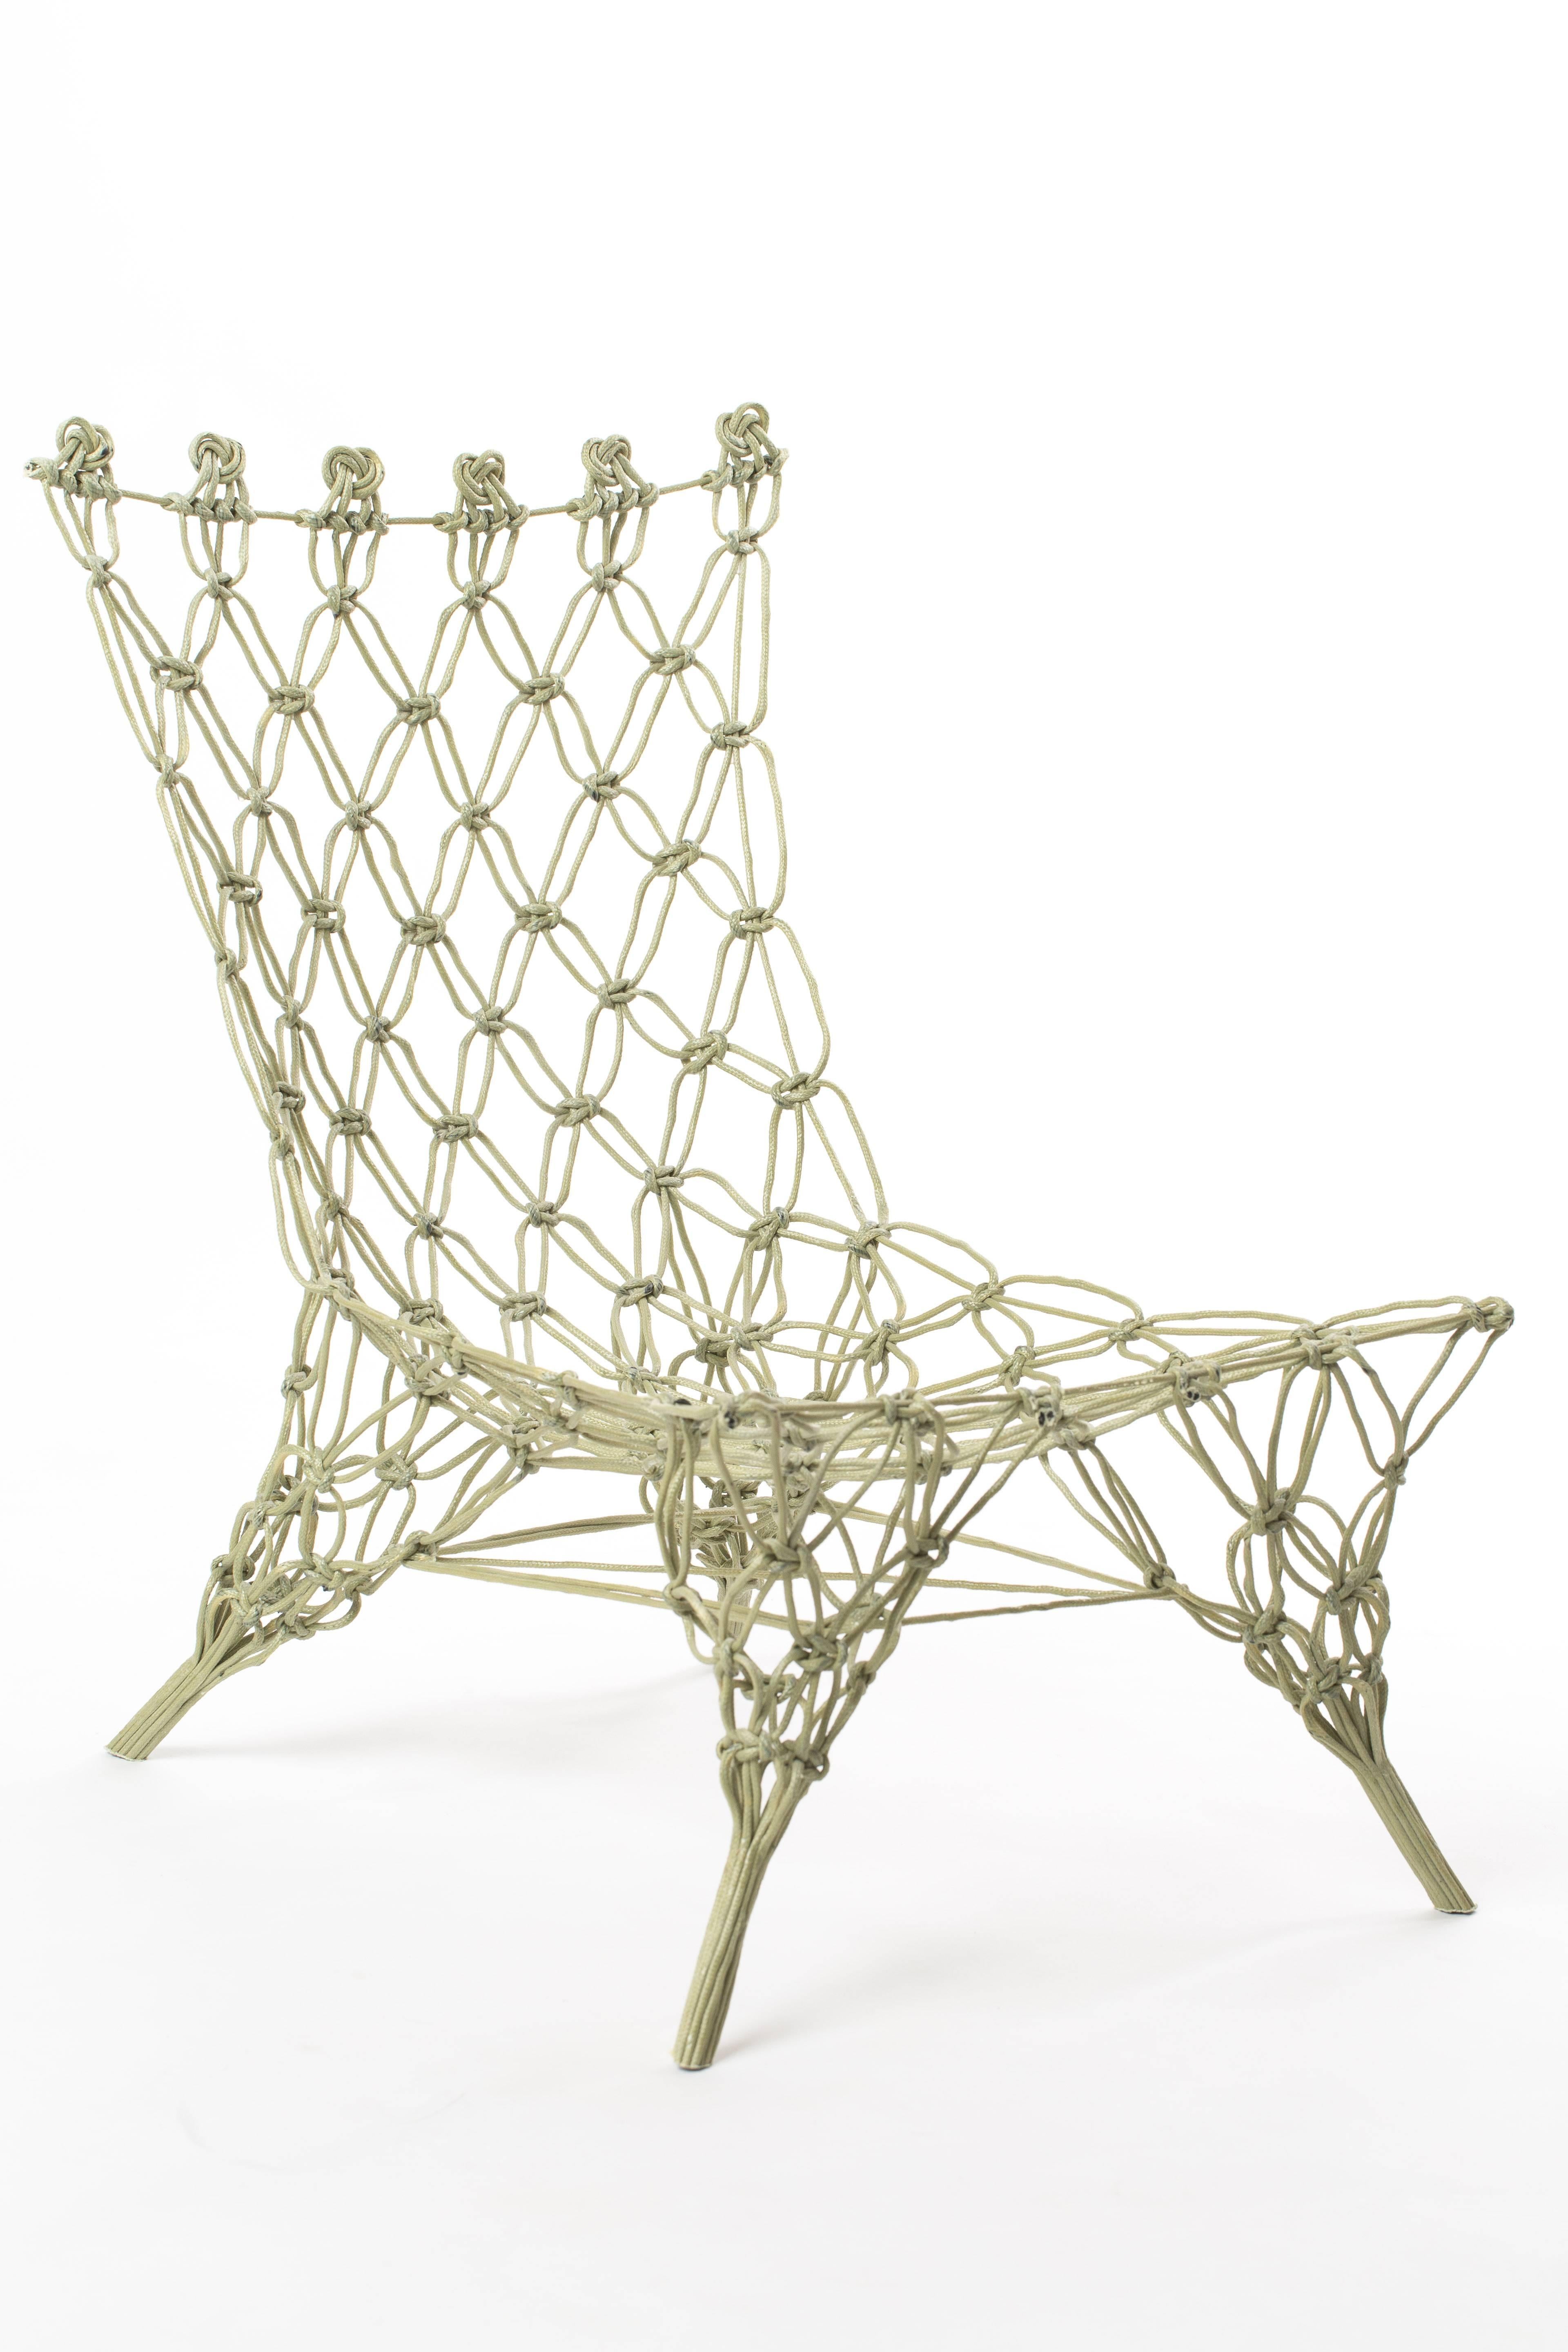 Late 20th Century Knotted Chair Marcel Wanders for Droog Design, the Netherlands